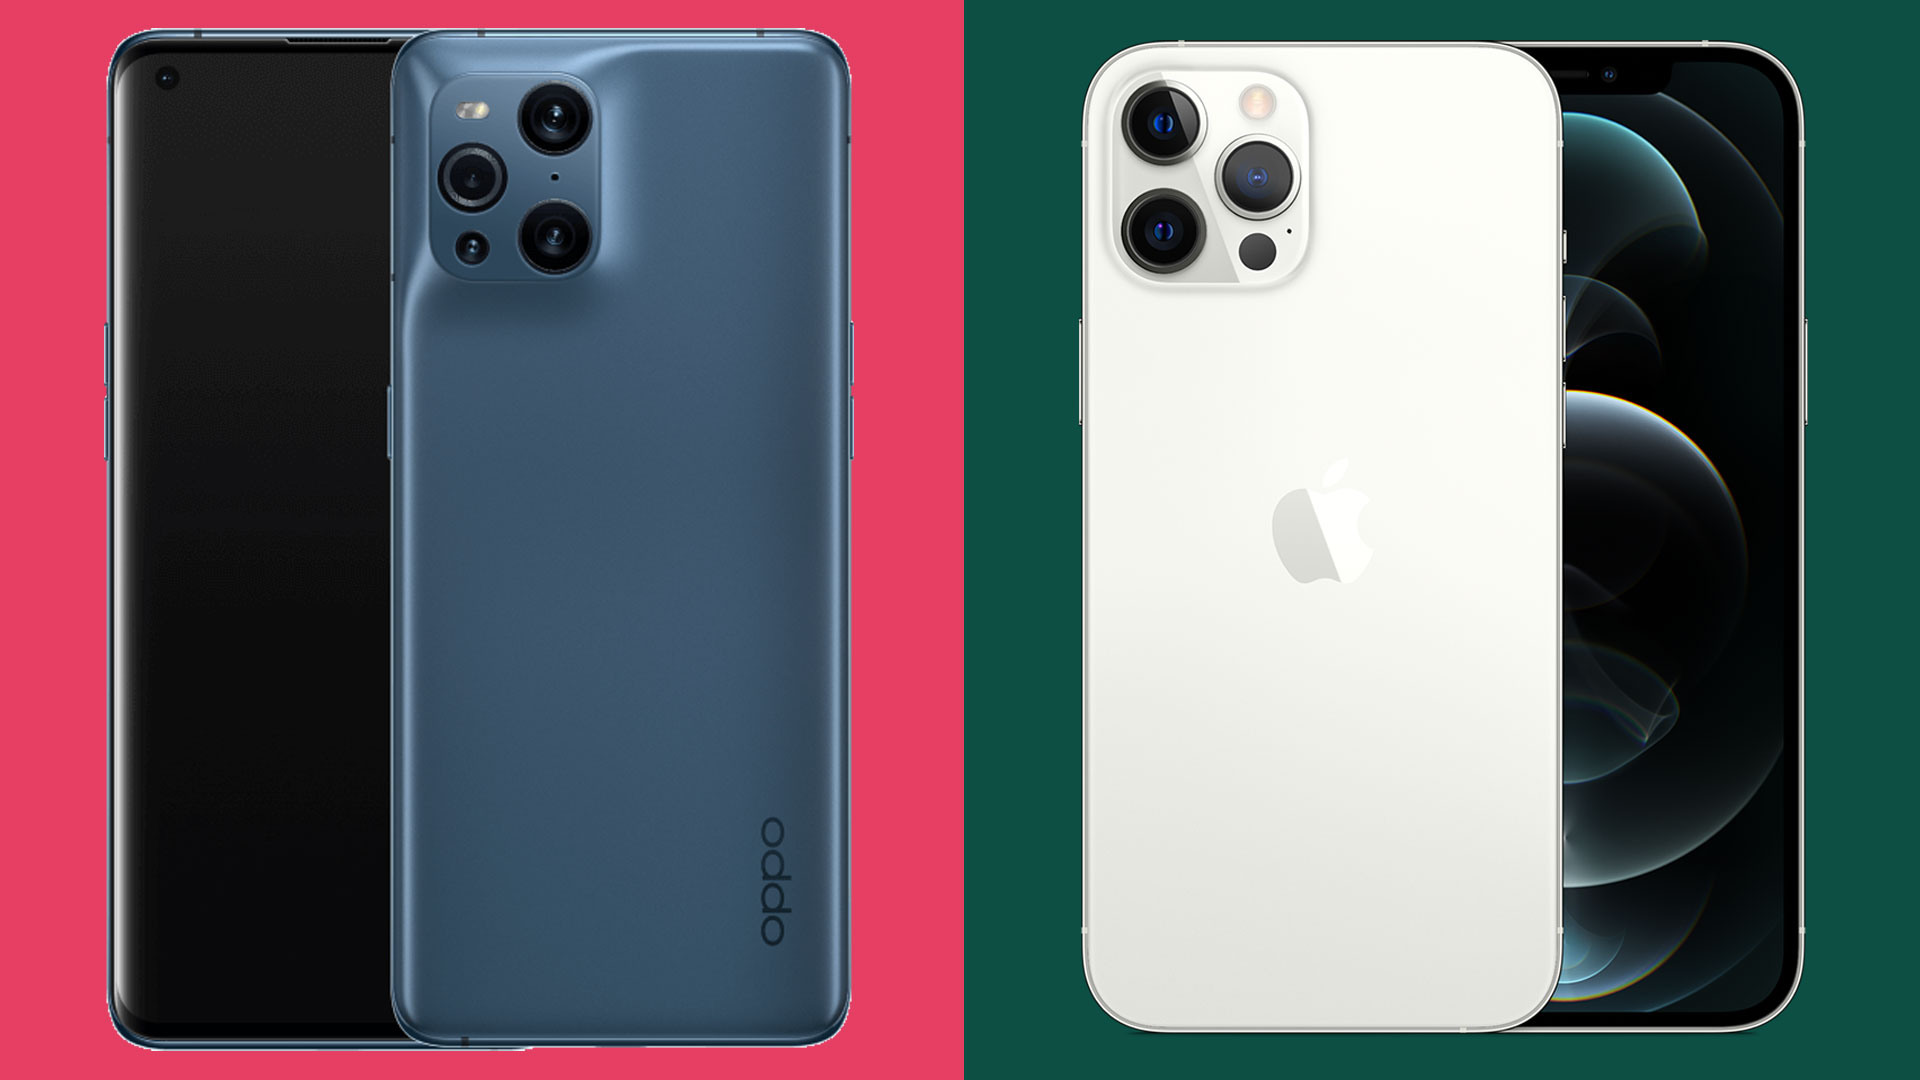 oppo-find-x3-pro-vs-iphone-12-pro-max-super-sized-camera-phones-face